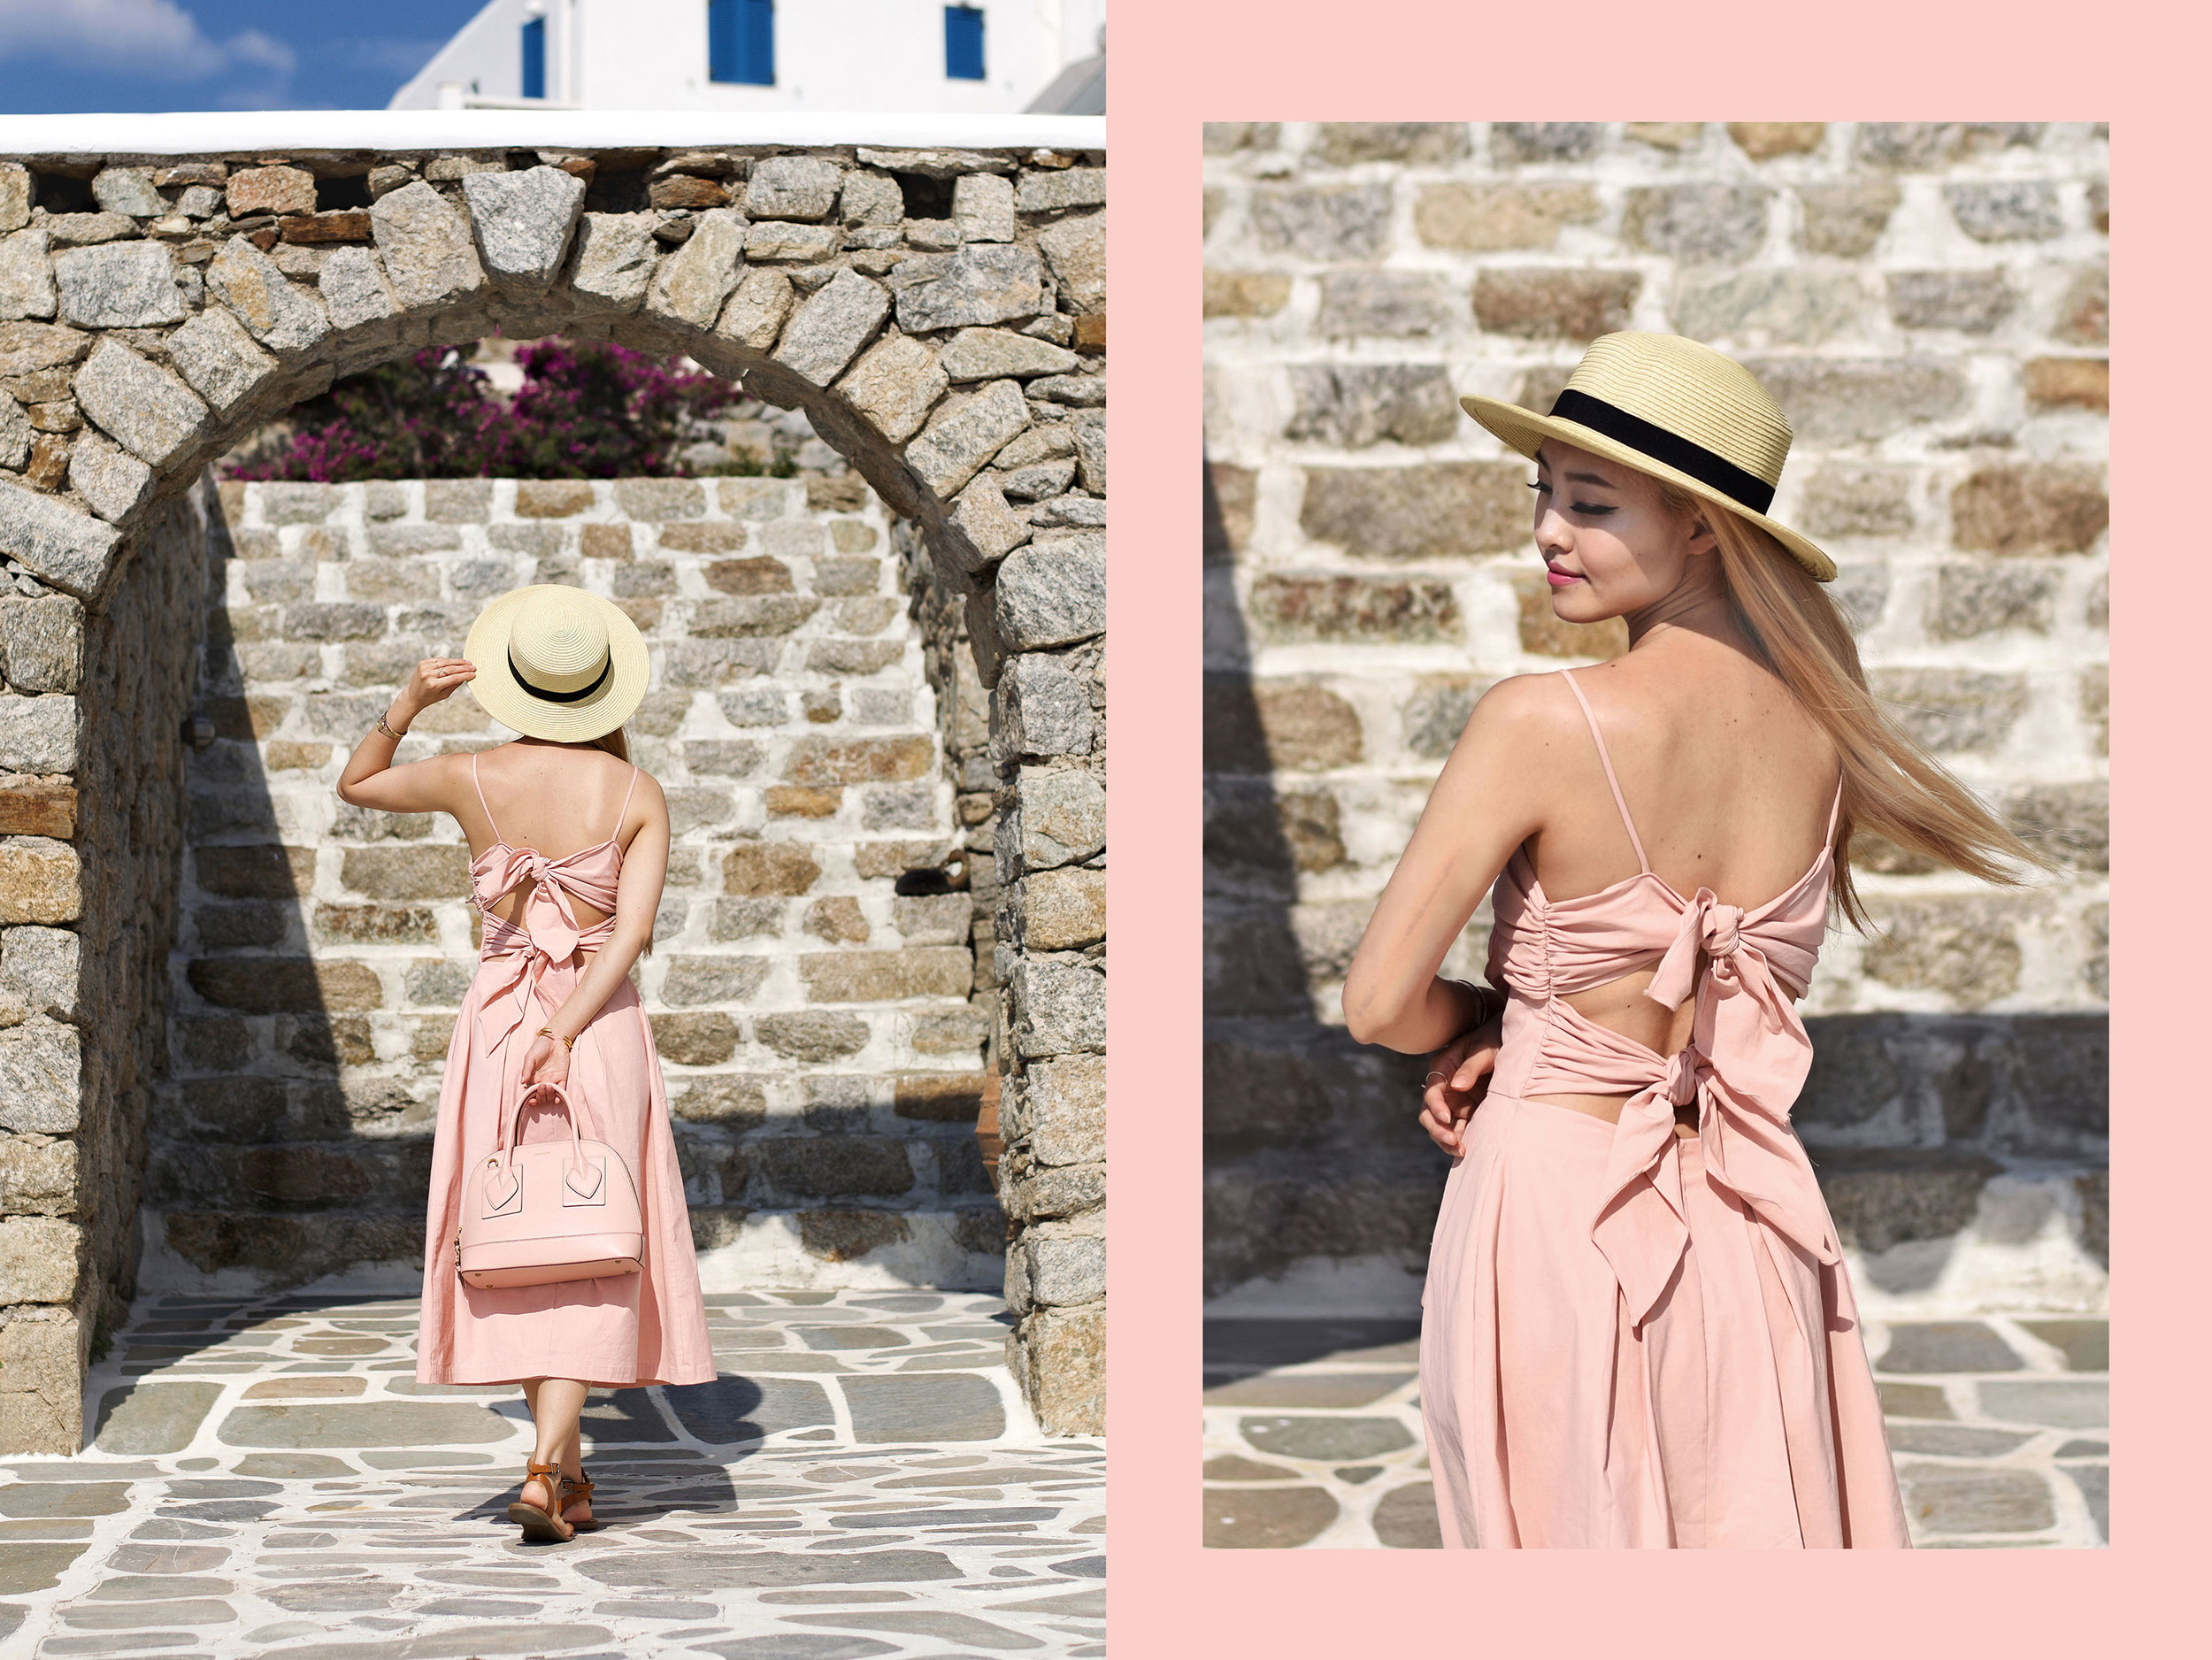  My Mykonos&nbsp; #lookbook &nbsp;is all about vacation vibes under the warm sunlight. When I think summer outfits, I imagine the cool touch of linen dresses, and straw hats for shade. Check it out now&nbsp; #ontheblog &nbsp;! |&nbsp; #travelMykonos 